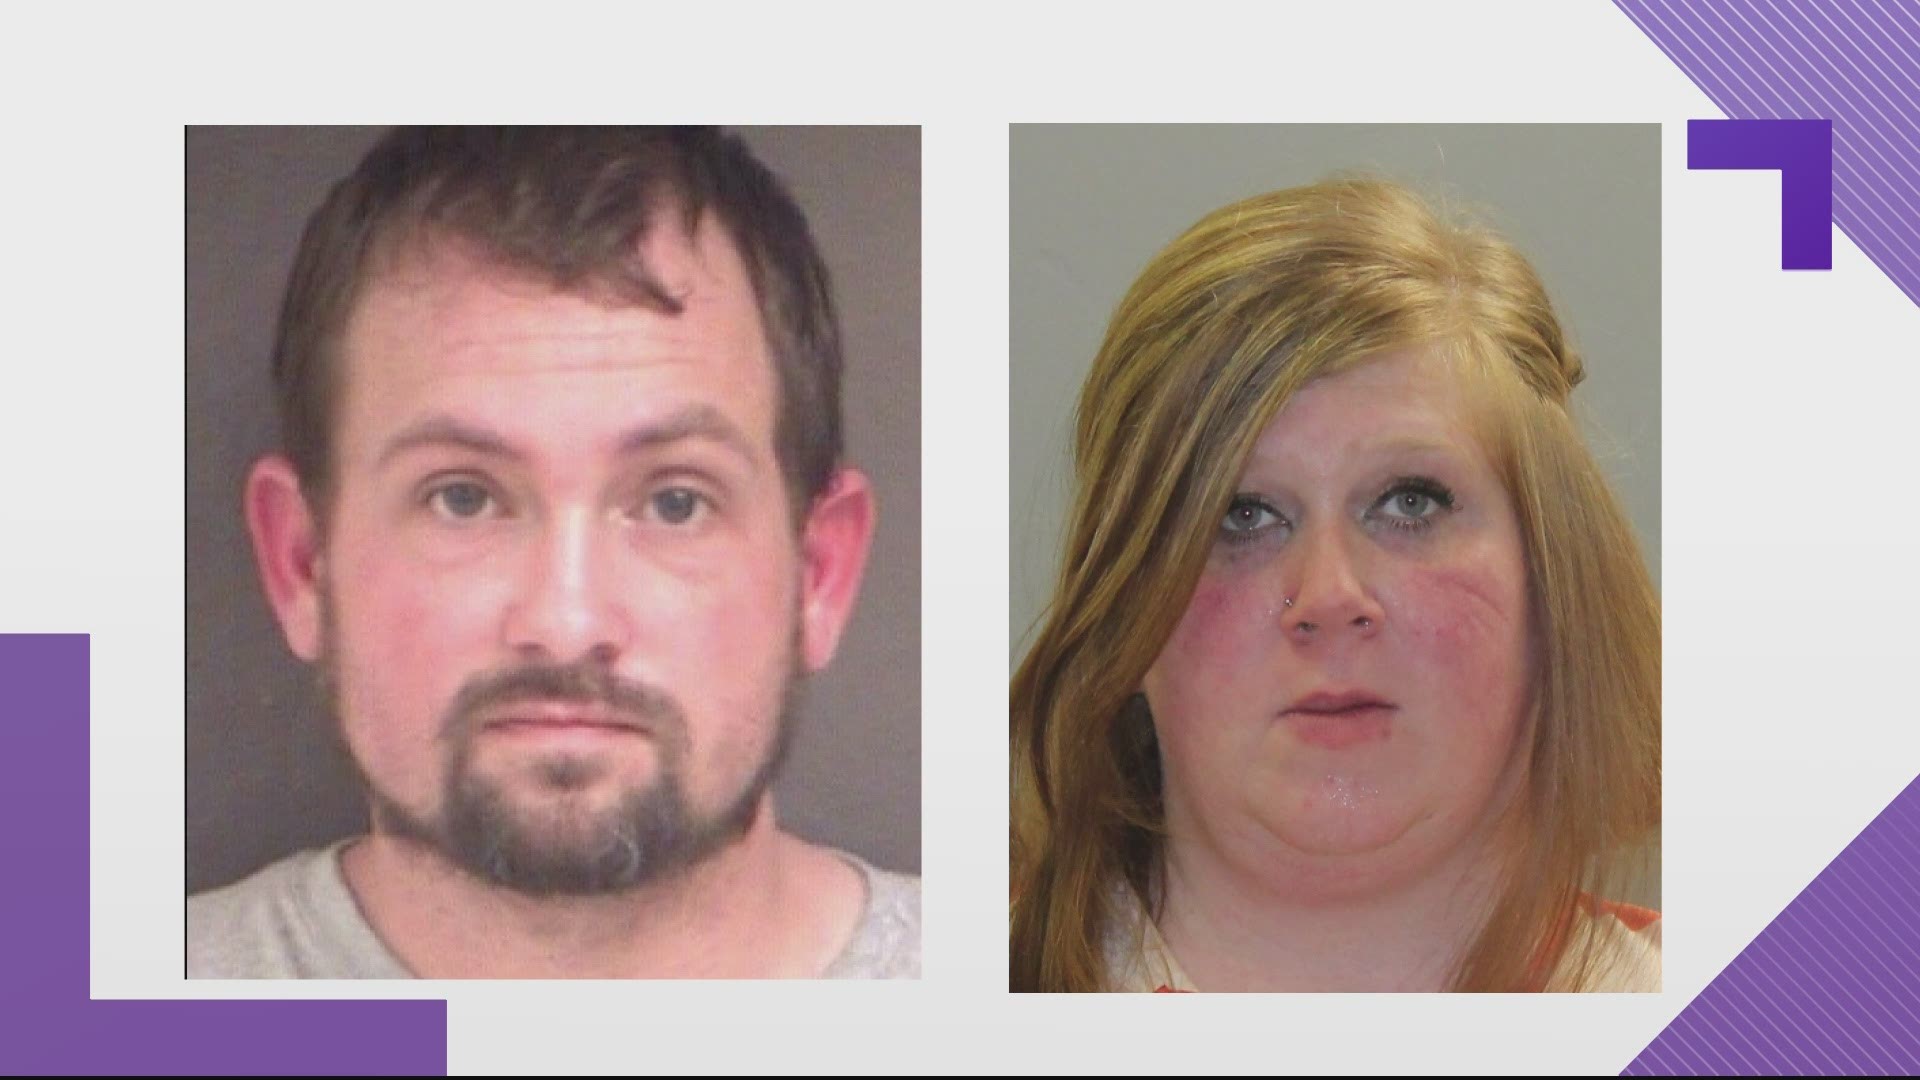 Jeremy Frazier, 34, and Heather Frazier, 34, both of Mount Airy are charged with felony involuntary manslaughter and misdemeanor neglect of a minor.